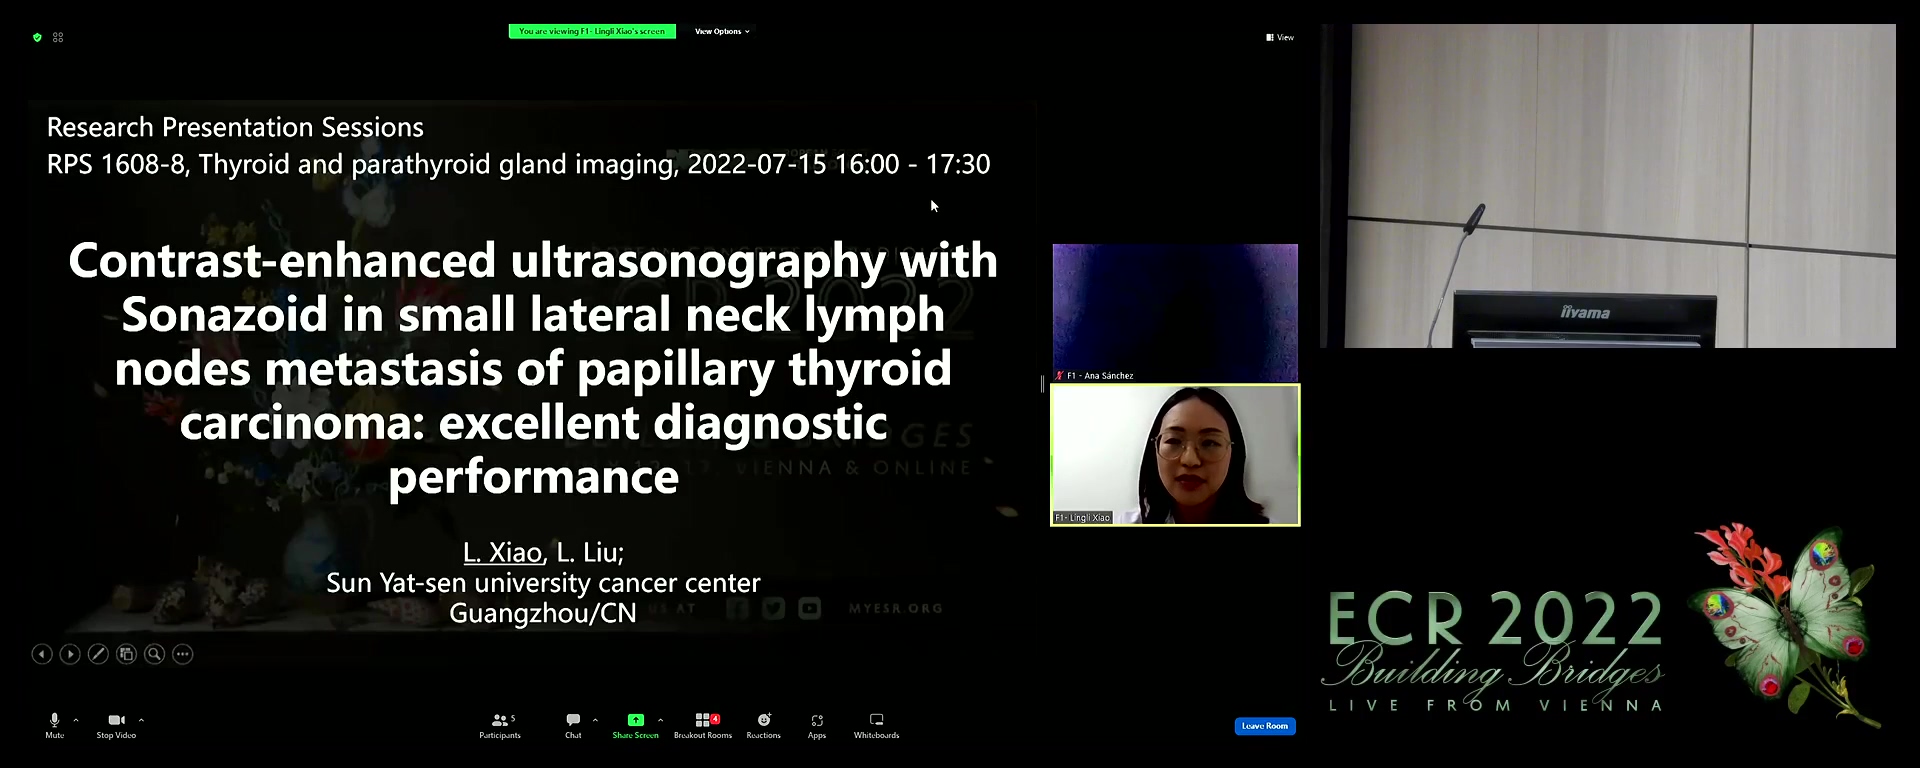 Contrast-enhanced ultrasonography with Sonazoid in small lateral neck lymph nodes metastasis of papillary thyroid carcinoma: excellent diagnostic performance